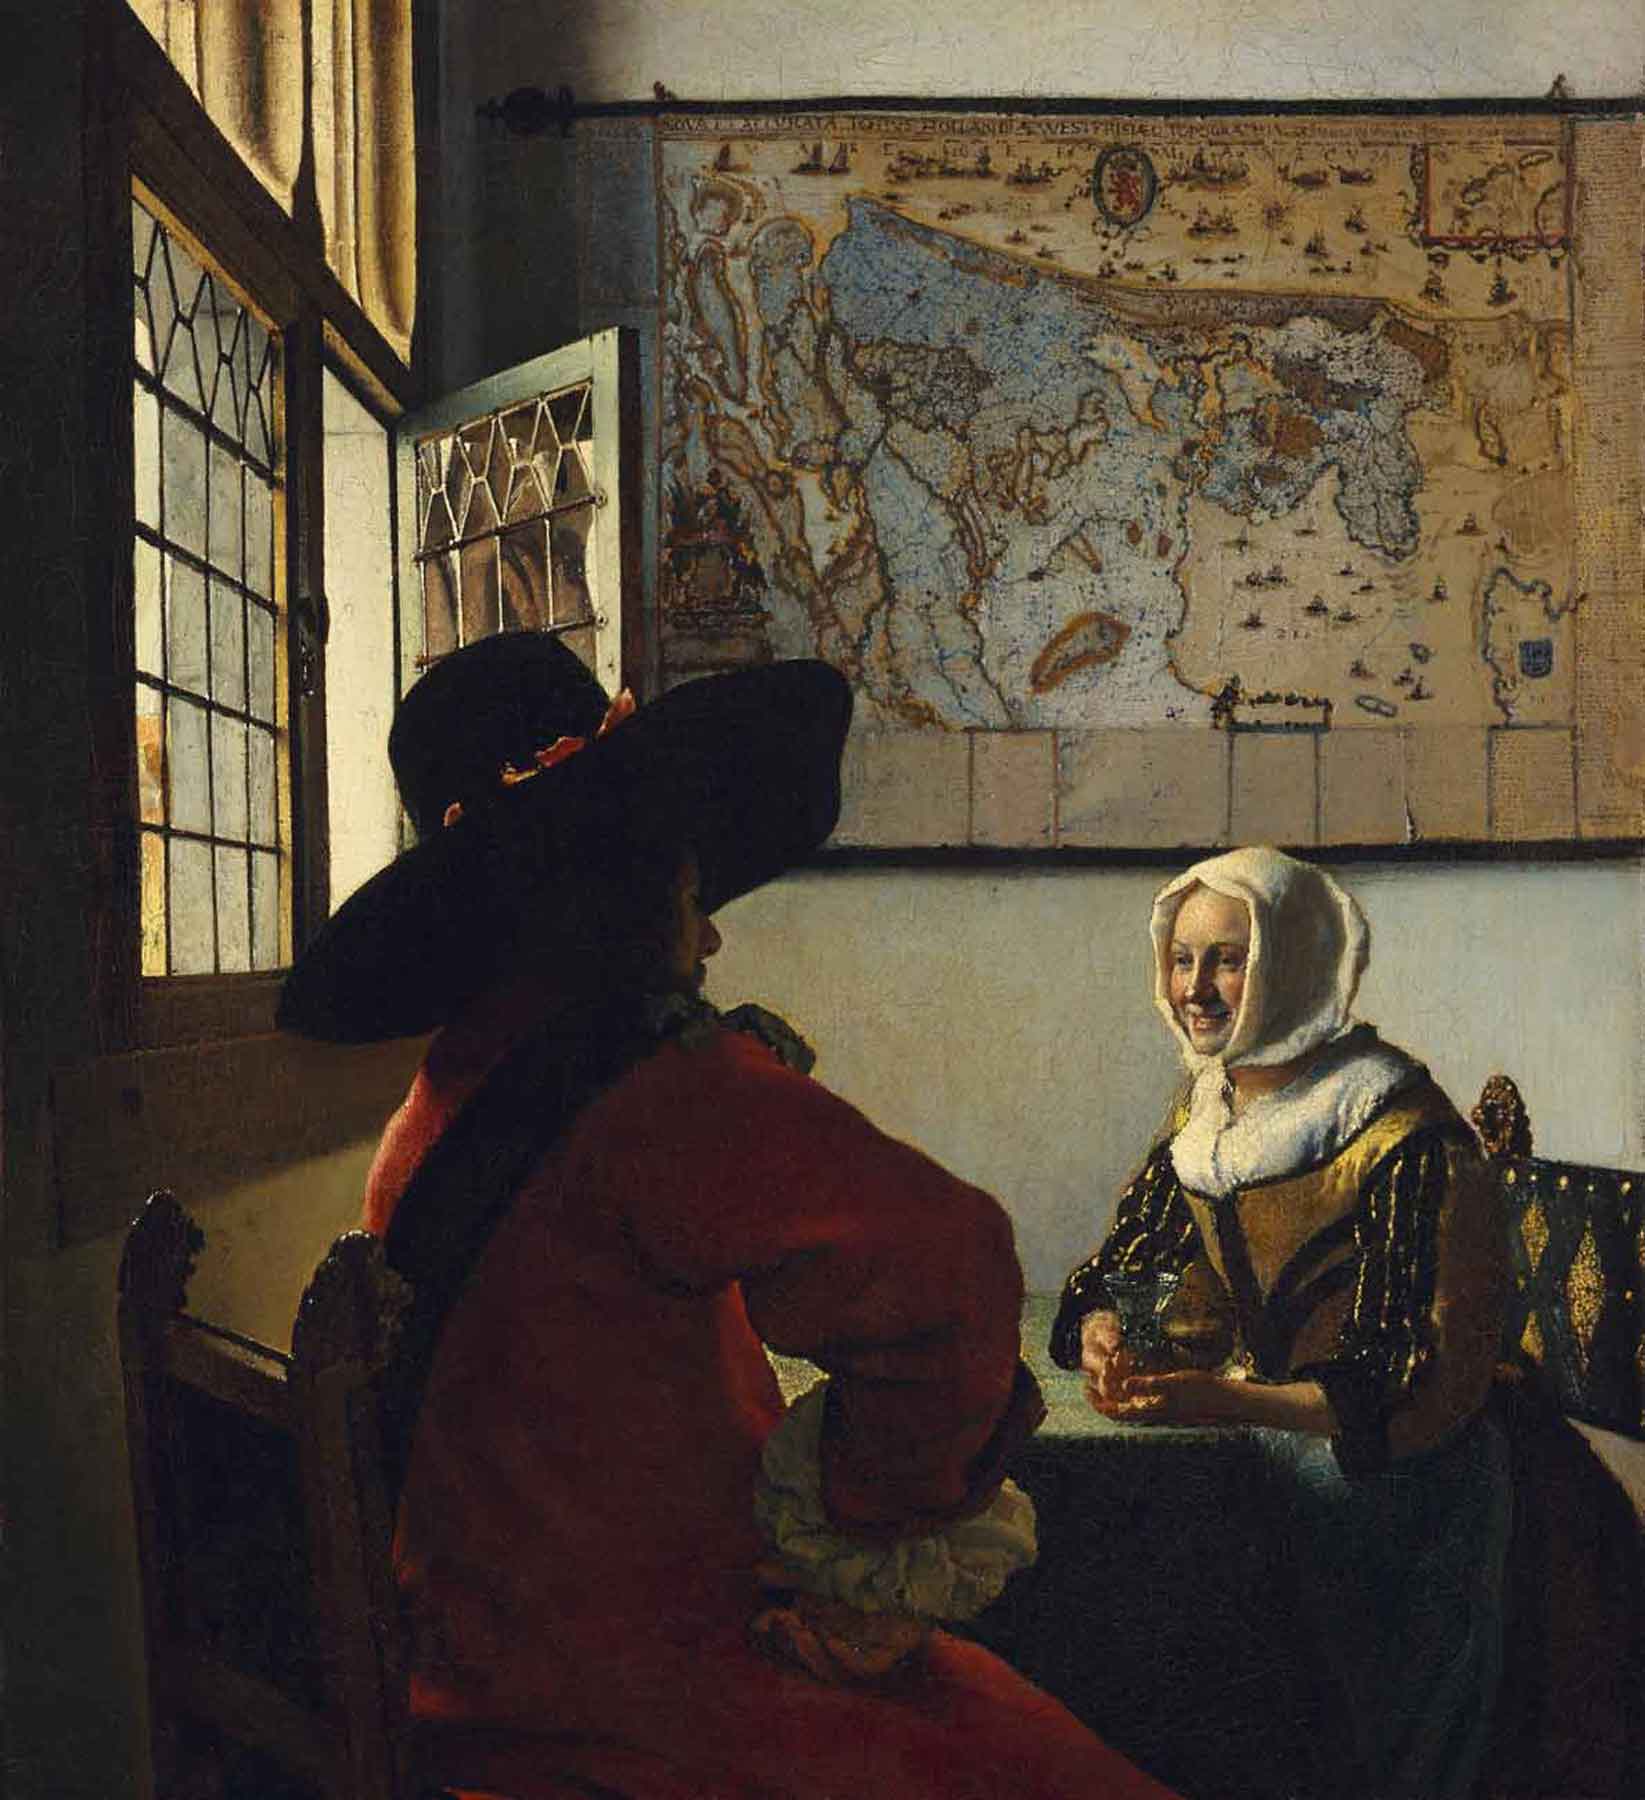 Painting of a Dutch soldier speaking to a woman seated at a table with a drink in front of a large wall map